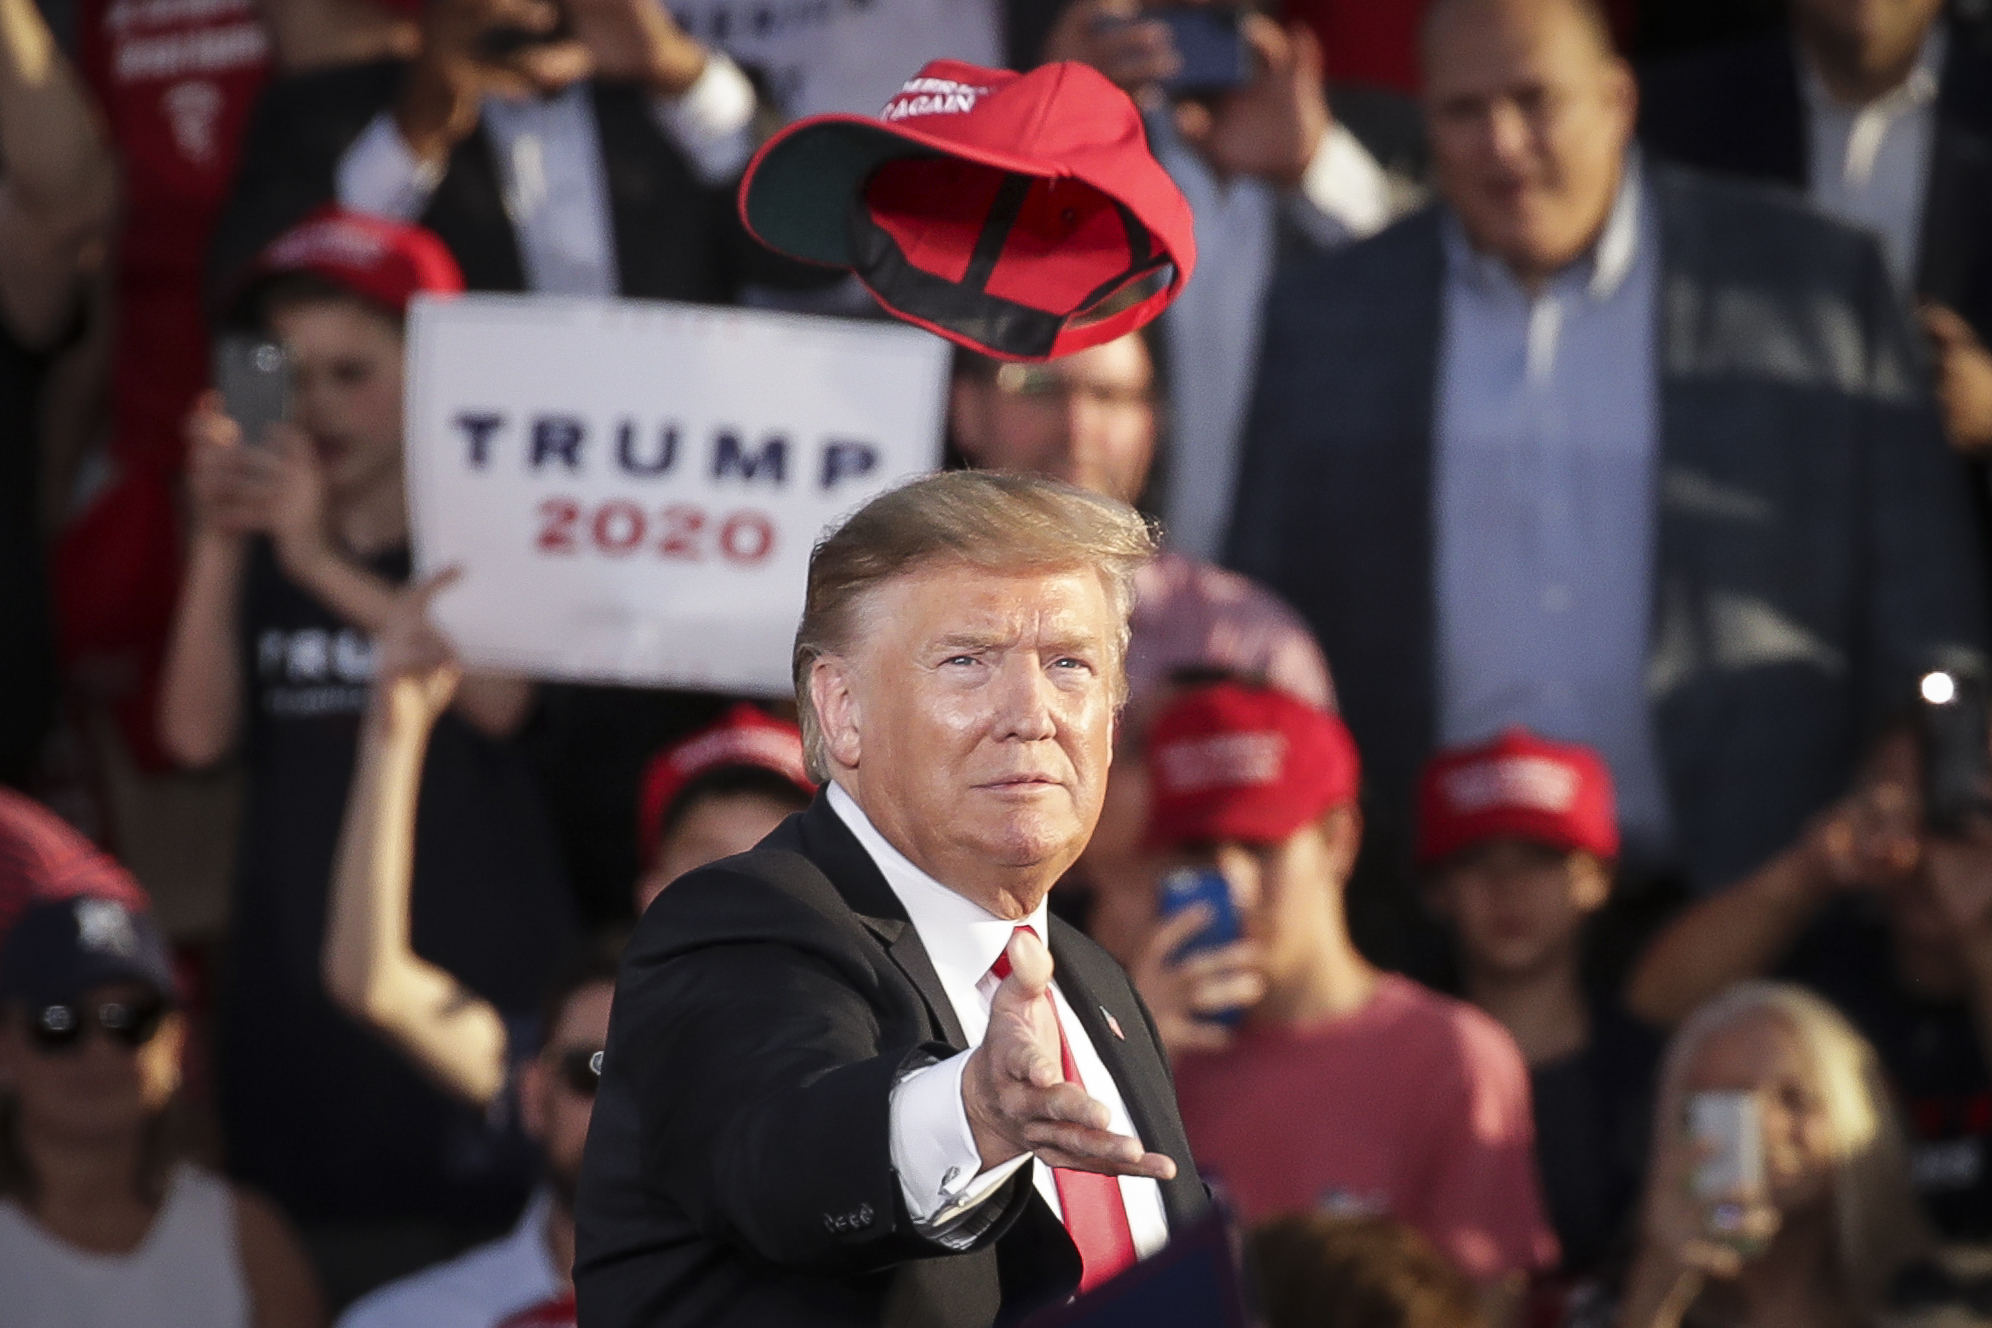 U.S. President Donald Trump tosses a hat into the crowd as he arrives for a 'Make America Great Again' campaign rally at Williamsport Regional Airport, May 20, 2019 in Montoursville, Pennsylvania. (Drew Angerer/Getty Images)